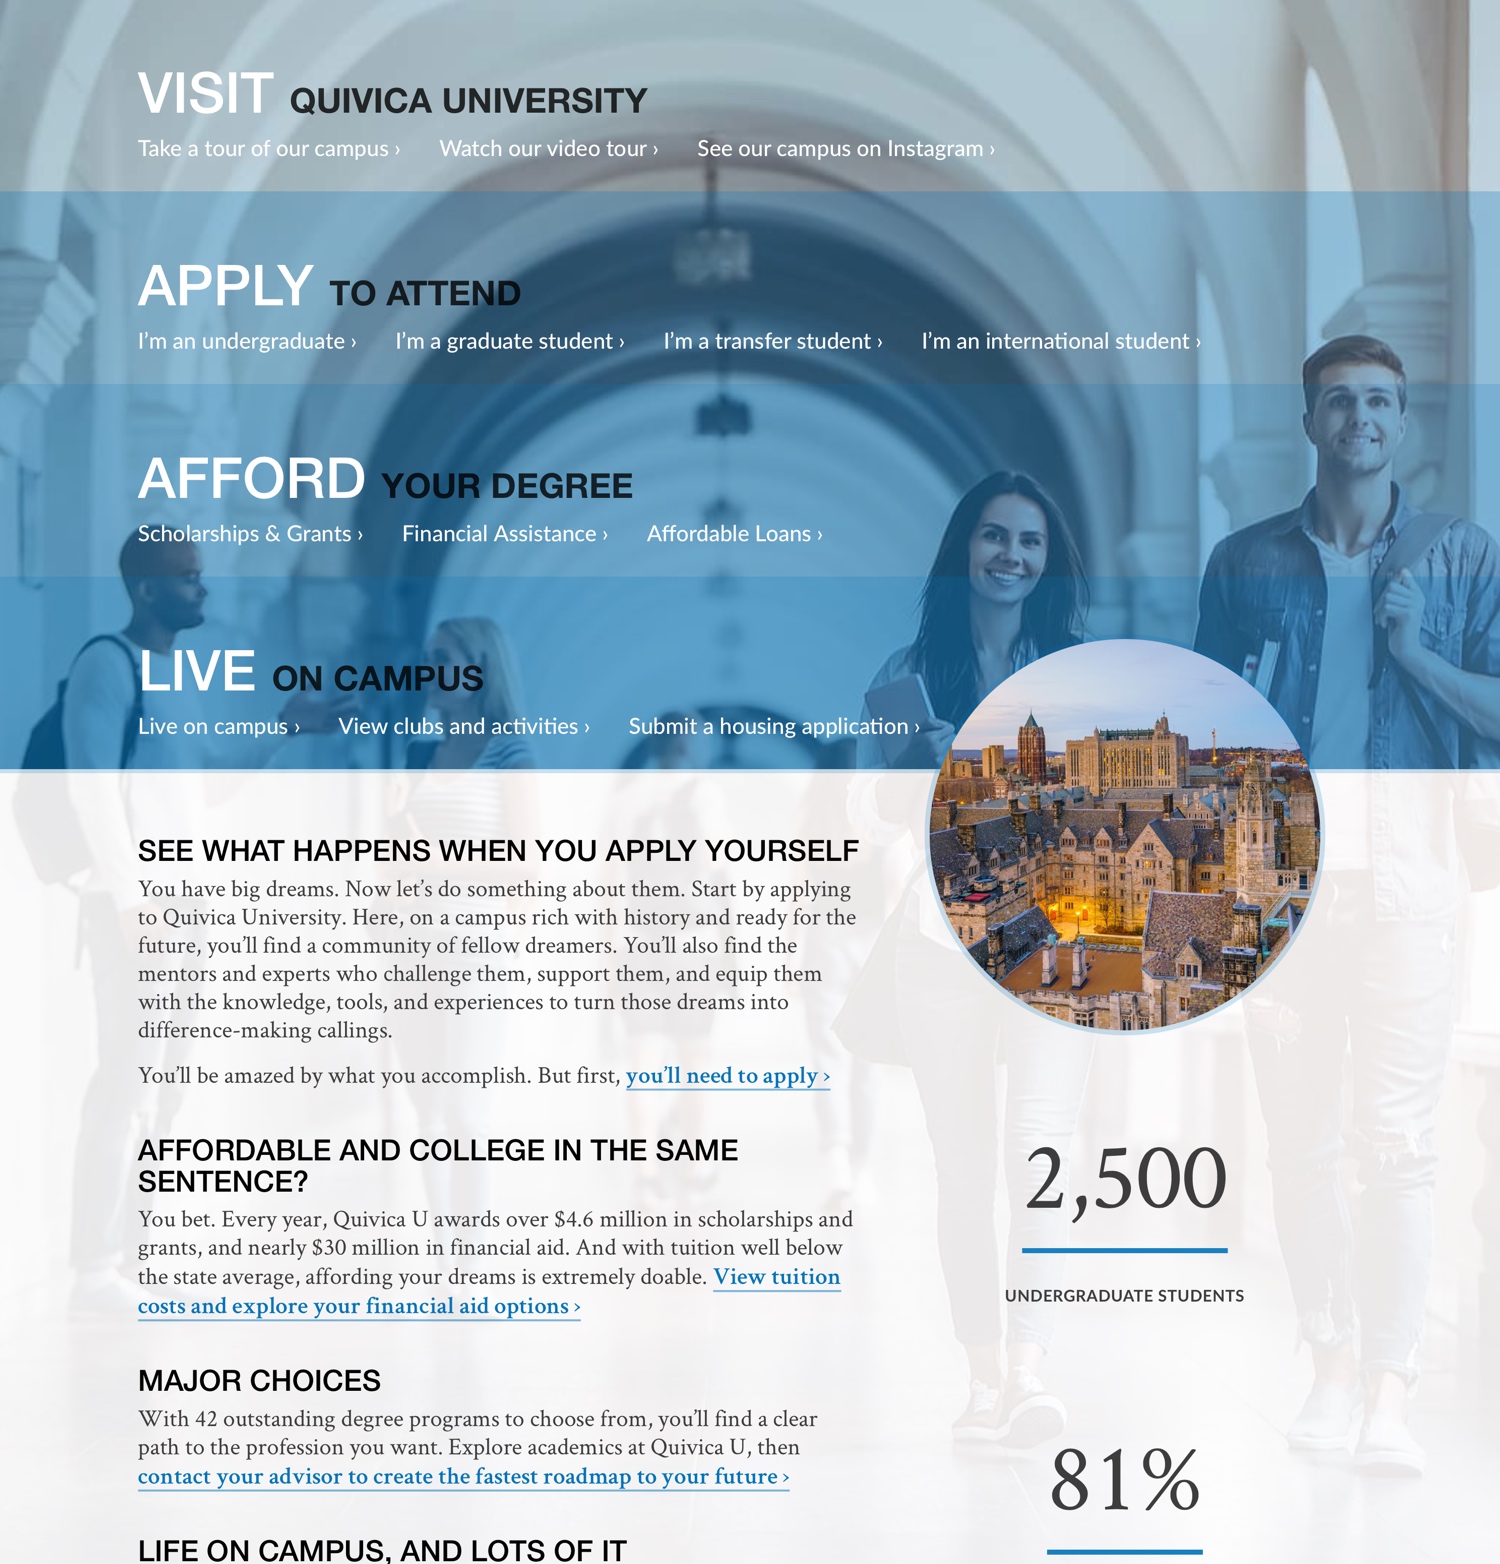 An image of a university admissions microsite showing students walking down a hallway with choices to visit, apply, afford, and live displayed on top.